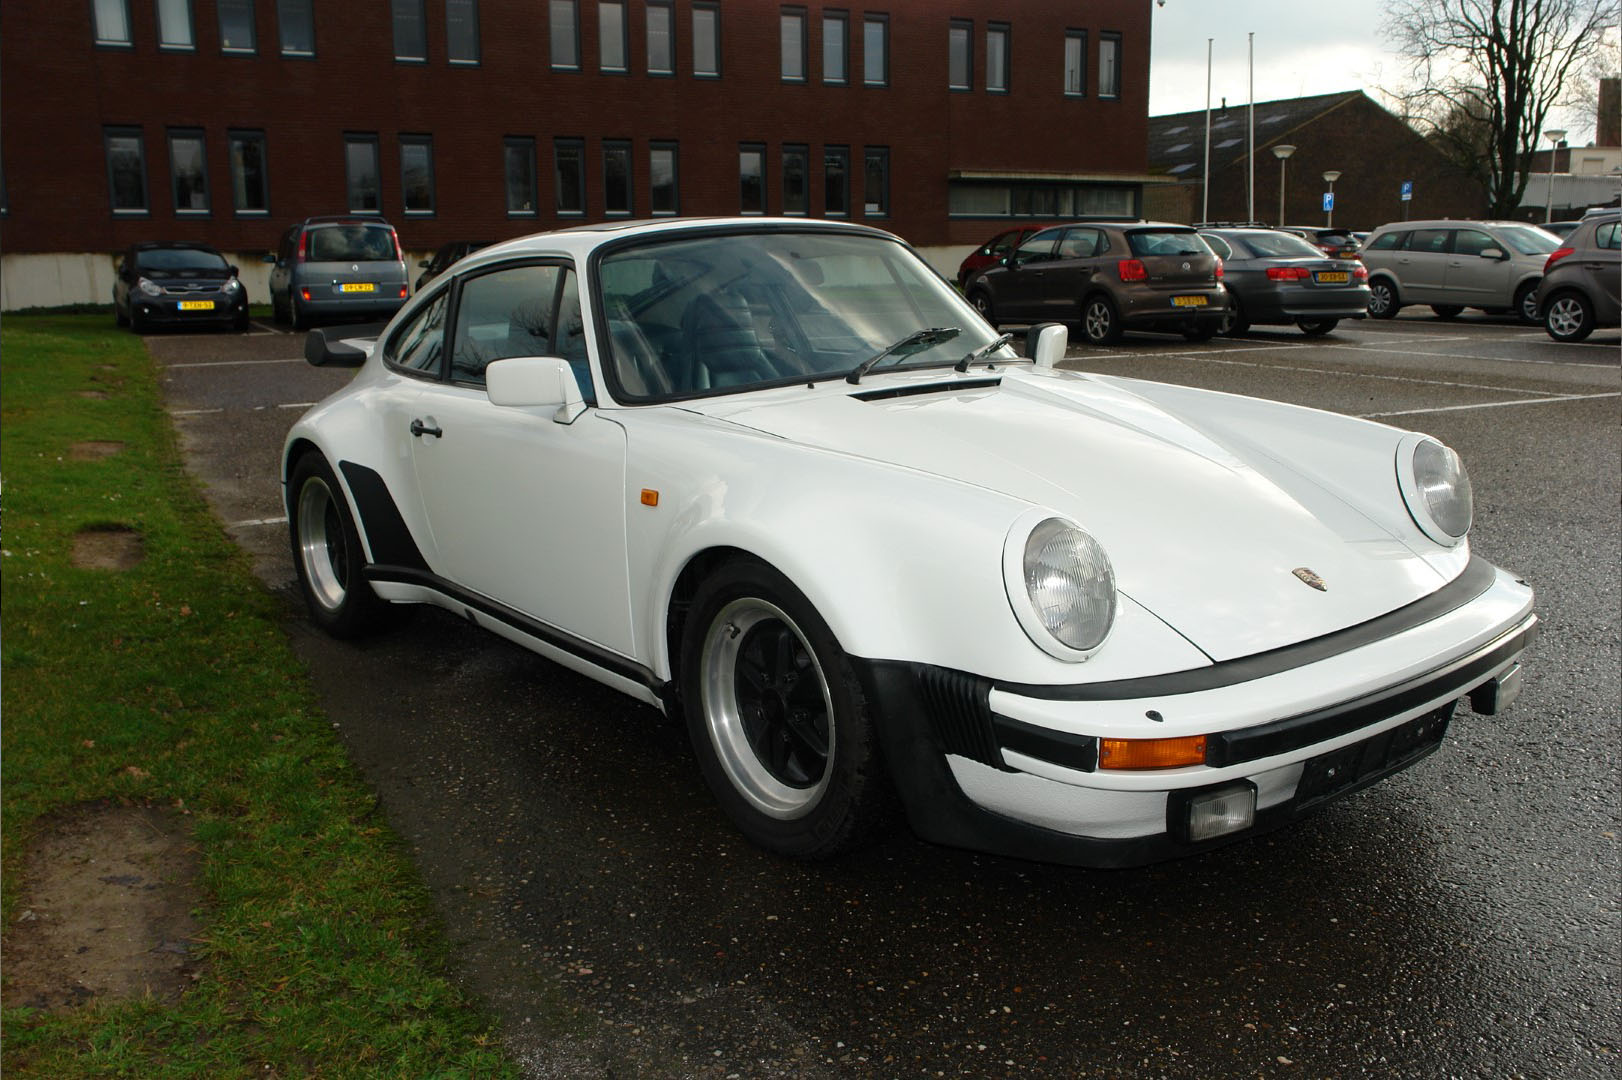 Buy this Porsche 930 Turbo Coupe   at Legendary Classics